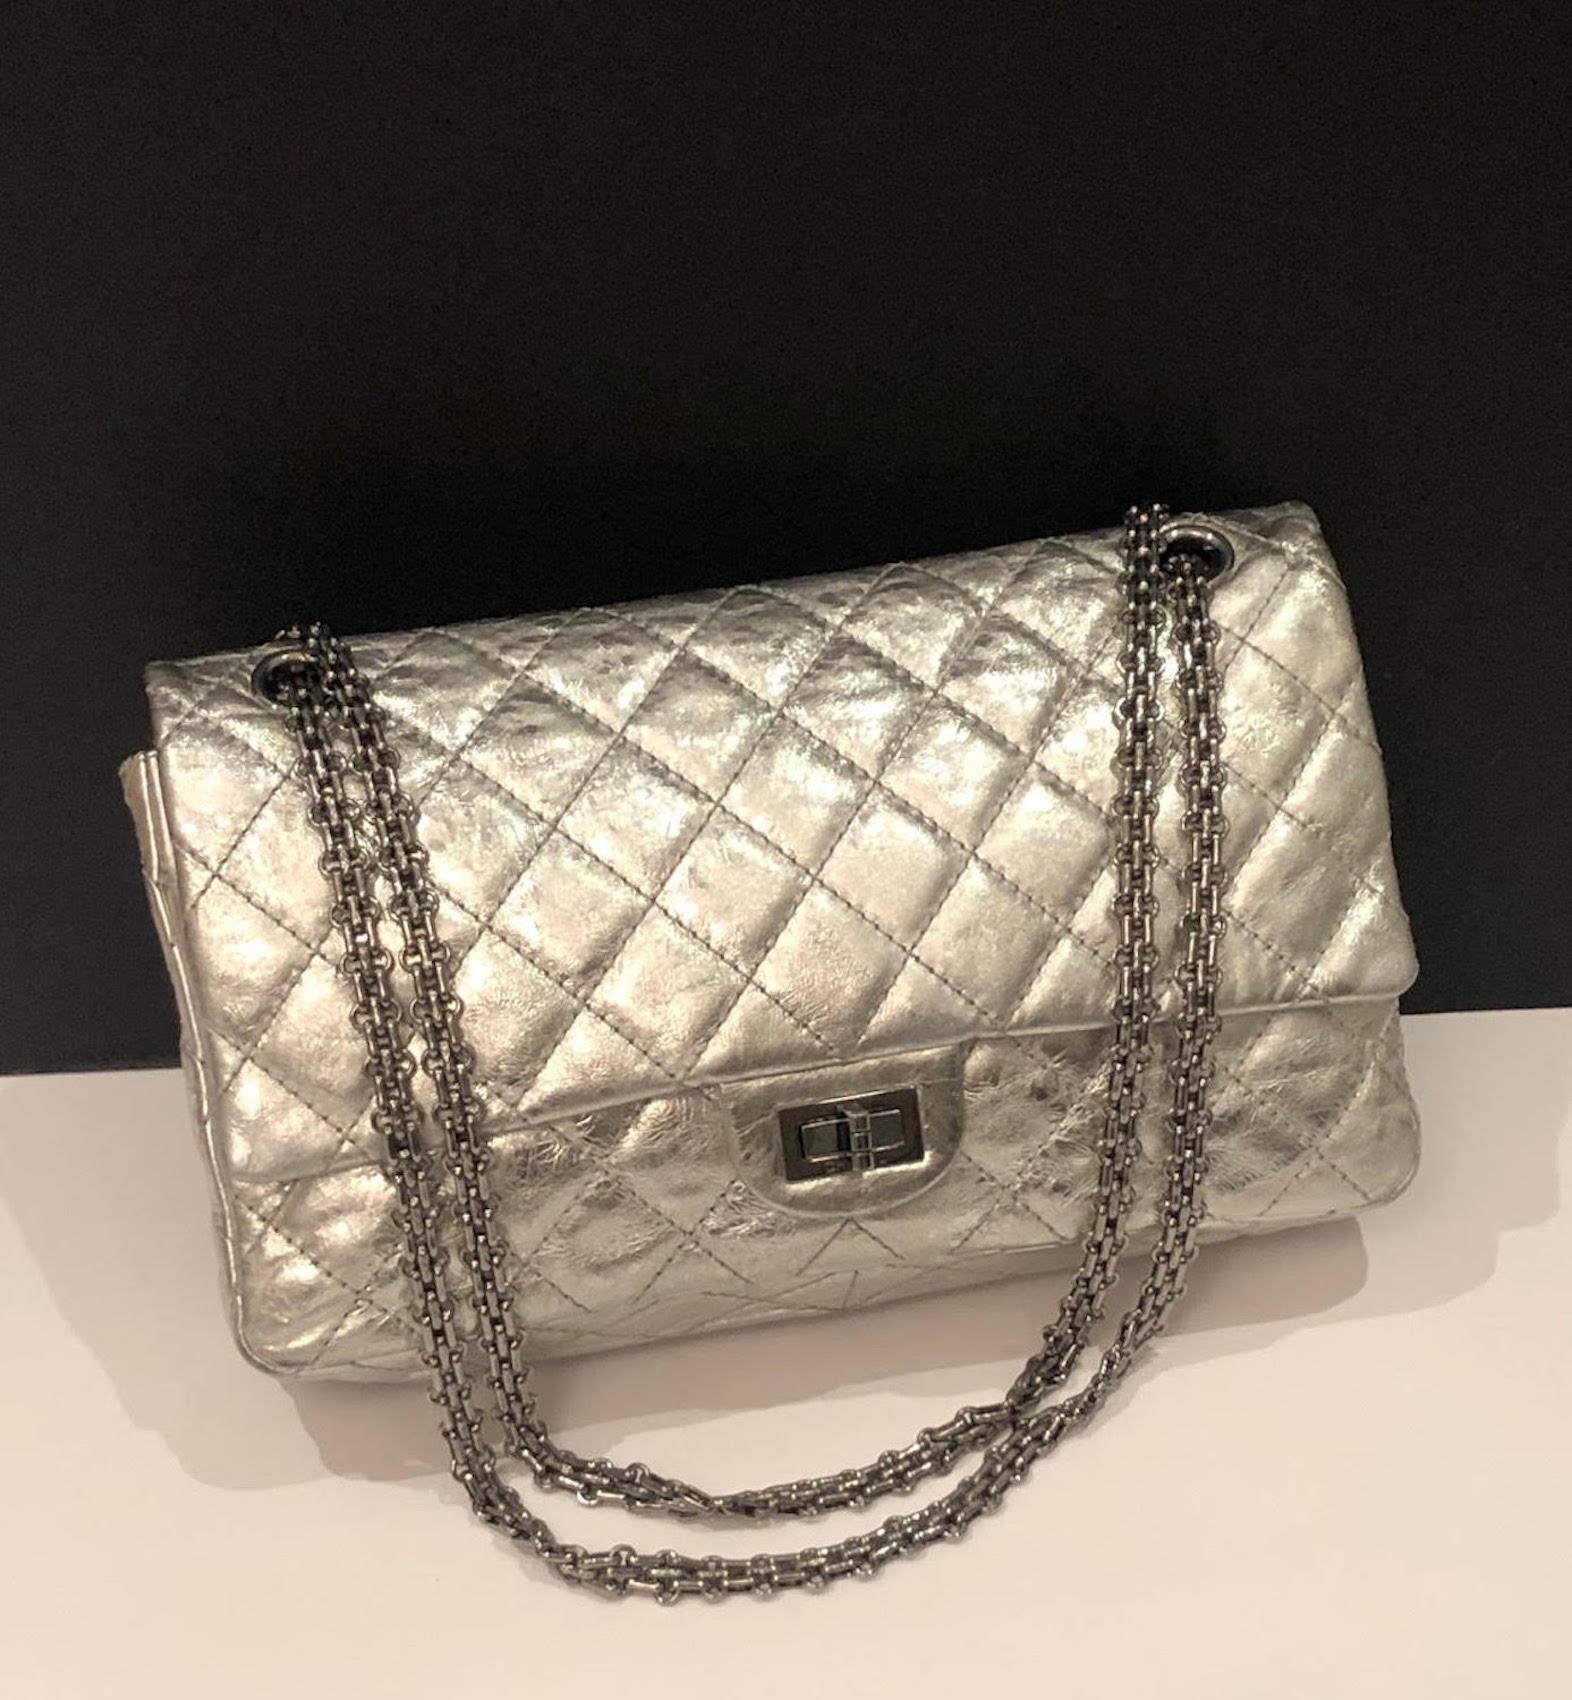 CHANEL Metallic Silver Quilted 2.55 Aged Leather Reissue Double Flap Bag 228  For Sale 4